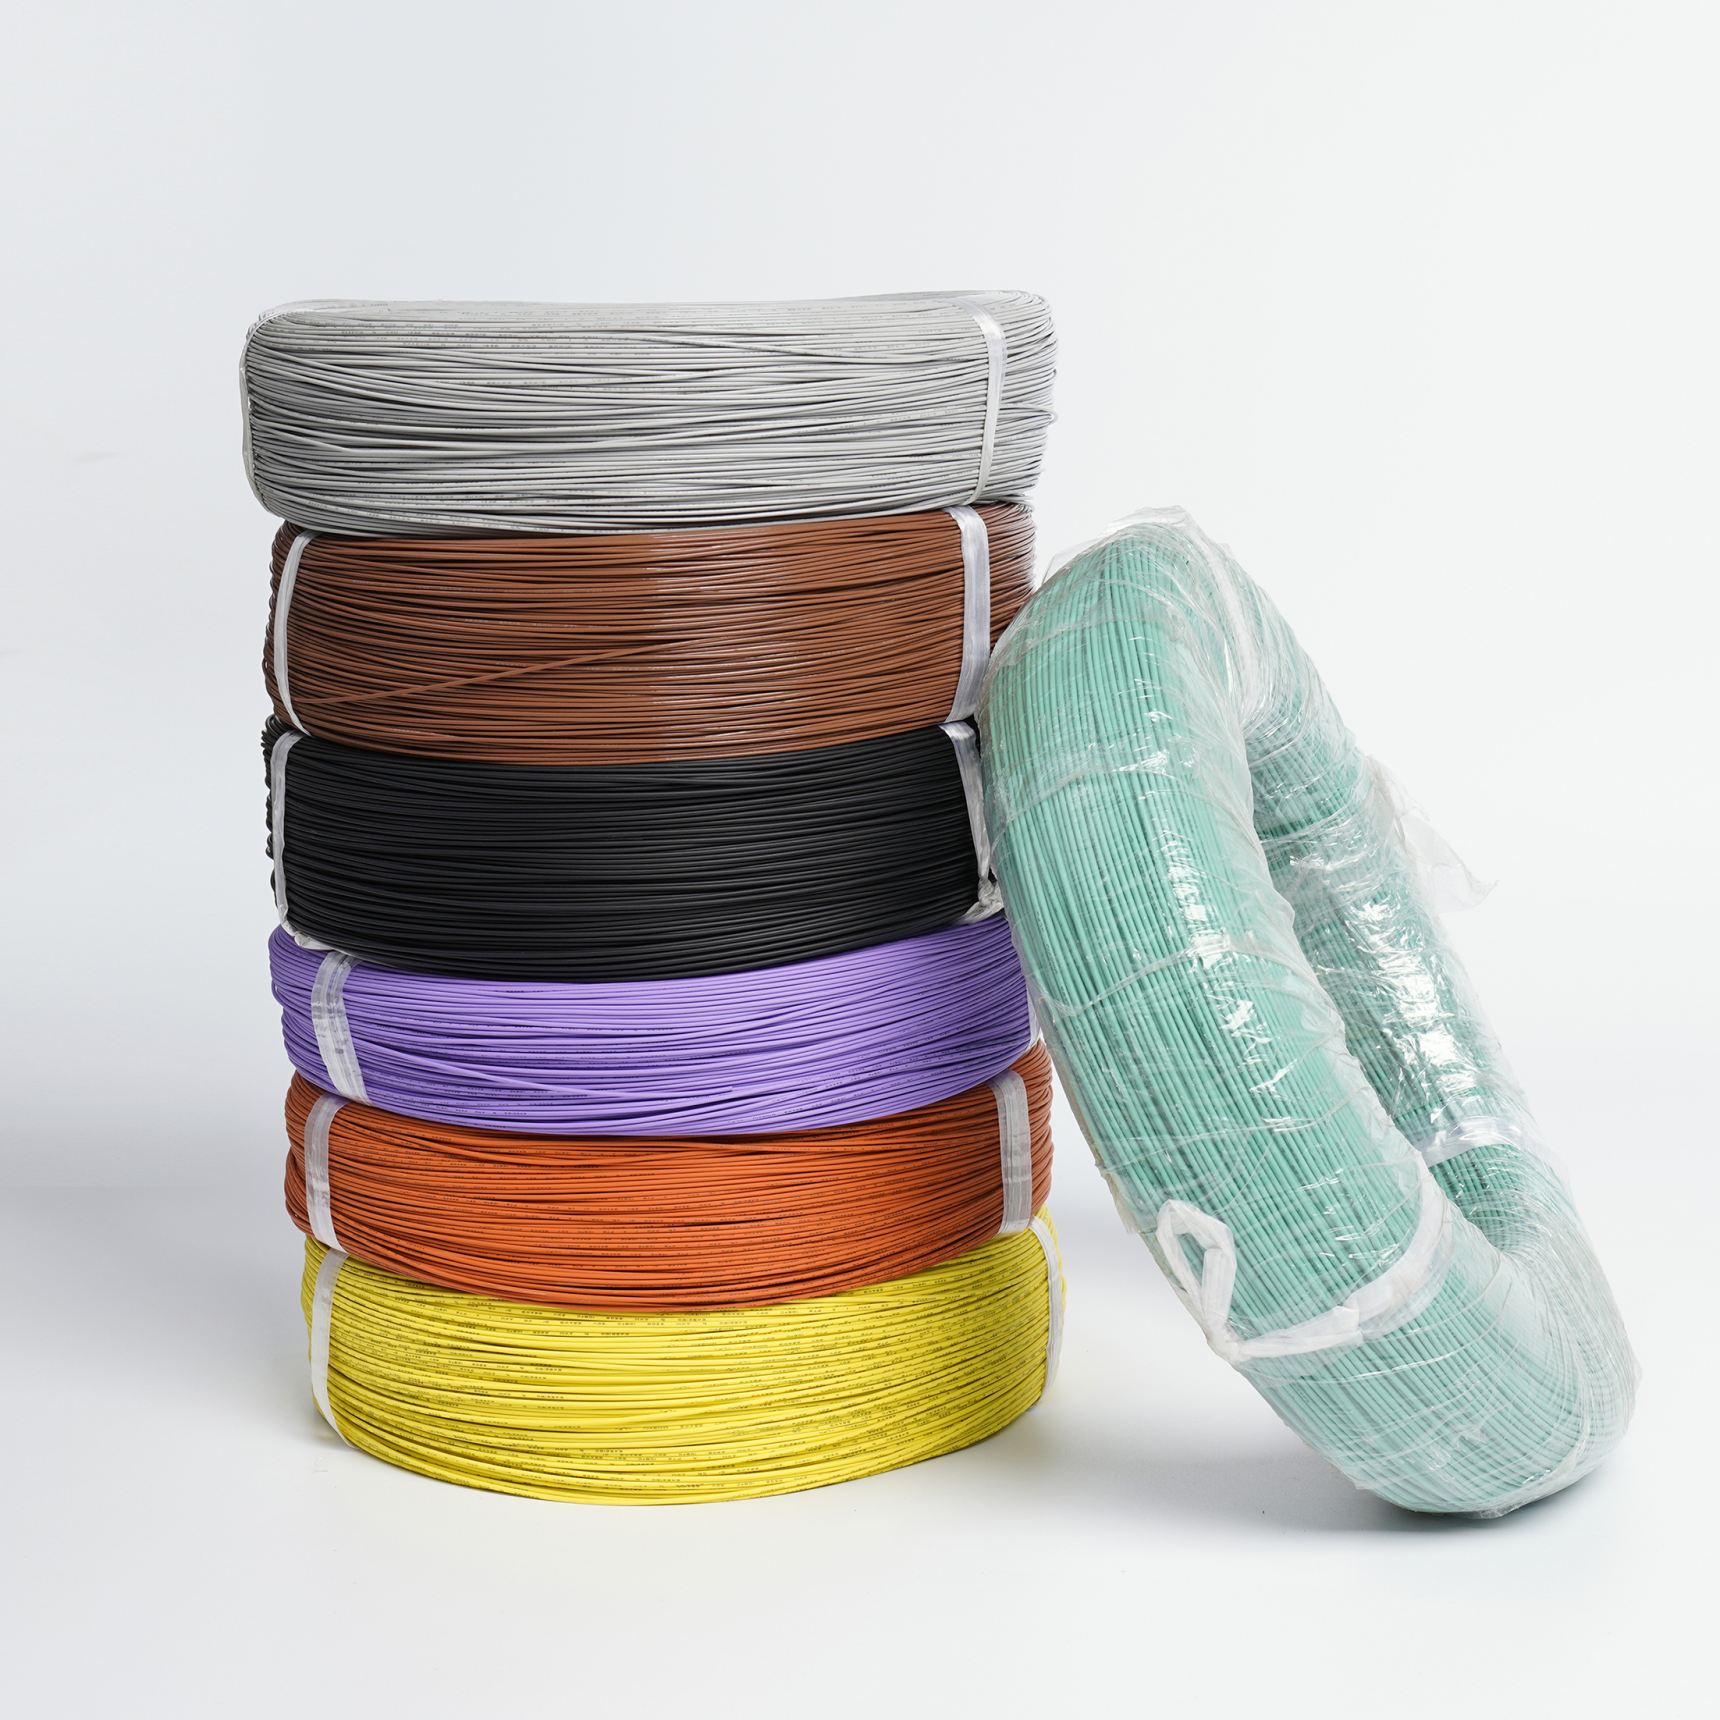 Home applicance electronic wire hareness UL3173 10AWG multi cores tinned copper XLPE electrical cable and wire